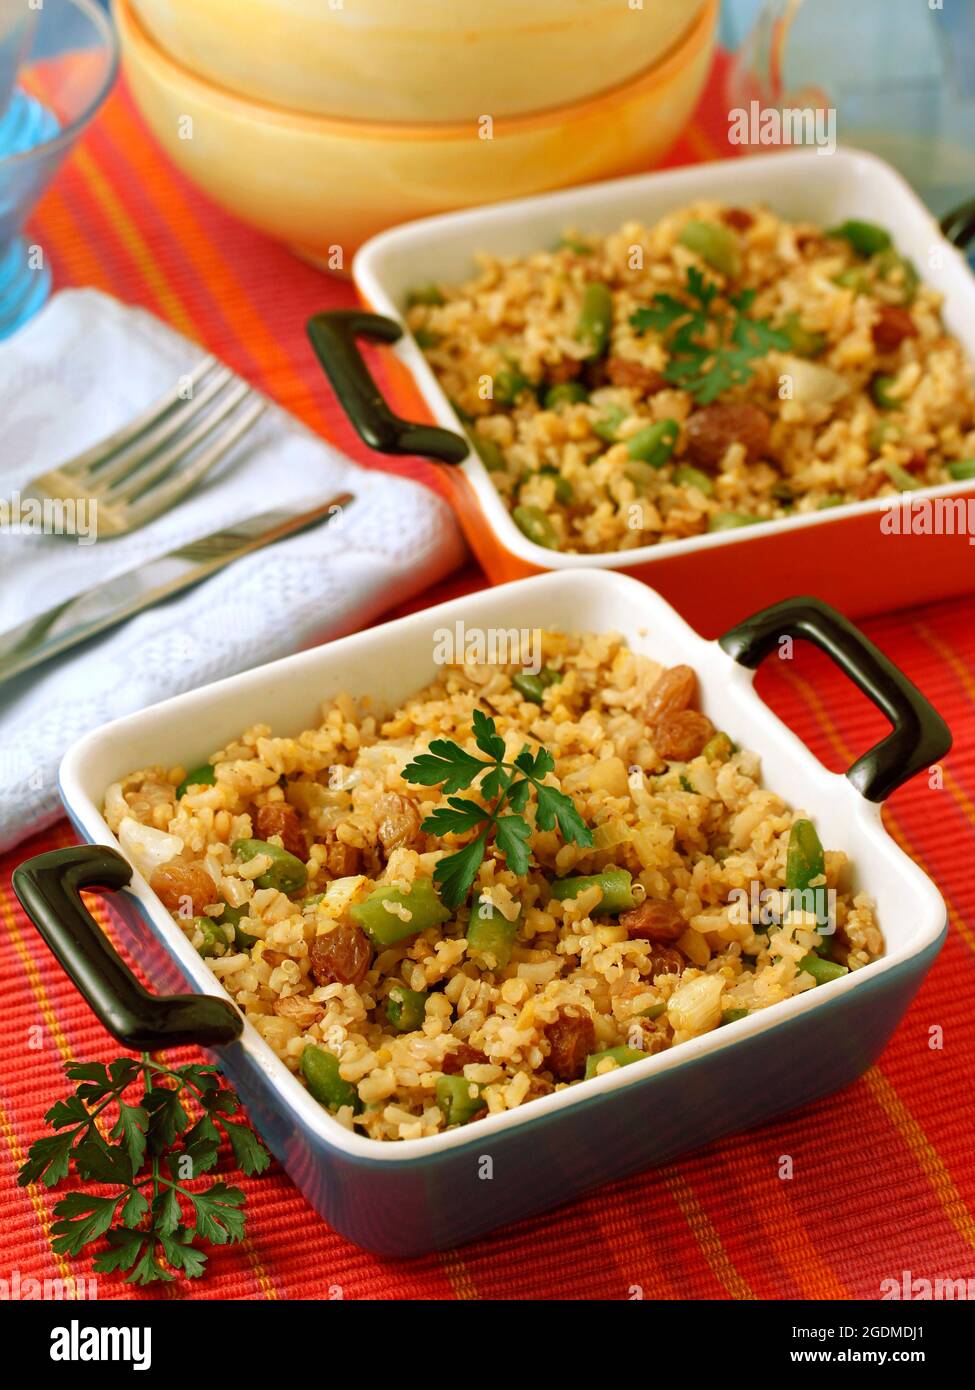 Rice, quinoa and bulgur with French greens and raisins. Stock Photo